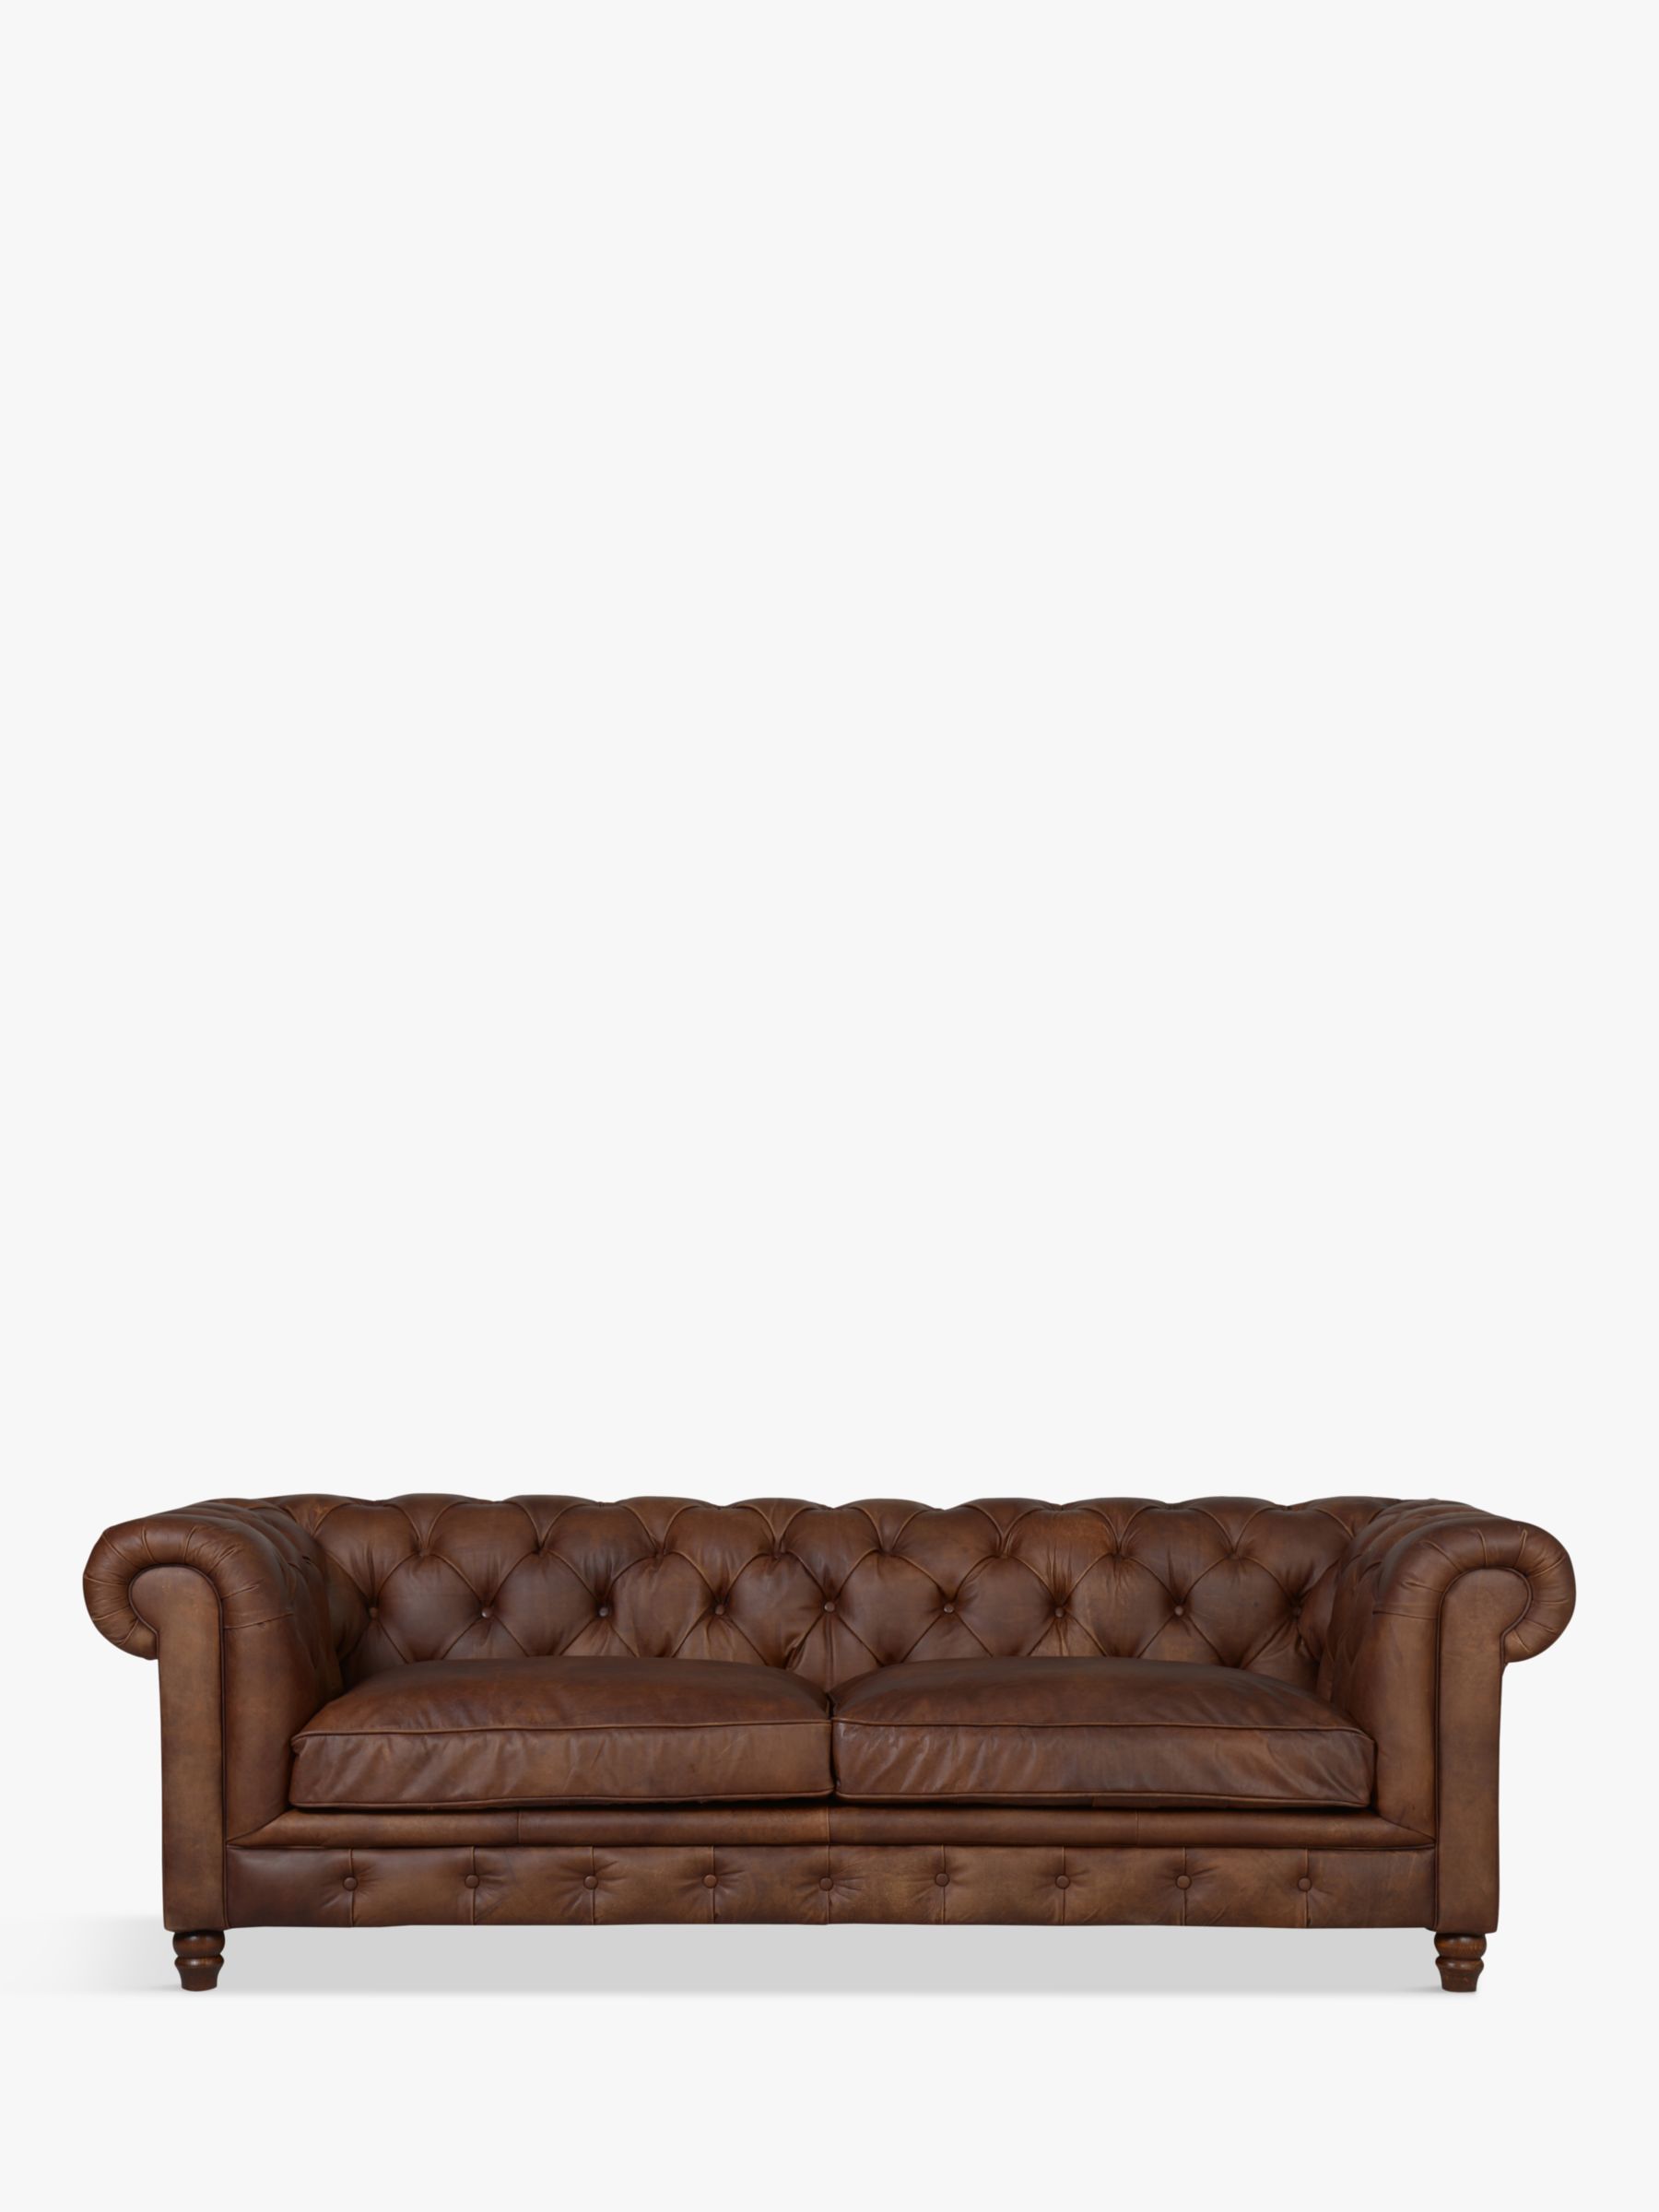 Earle Range, Halo Earle Chesterfield Grand 4 Seater Leather Sofa